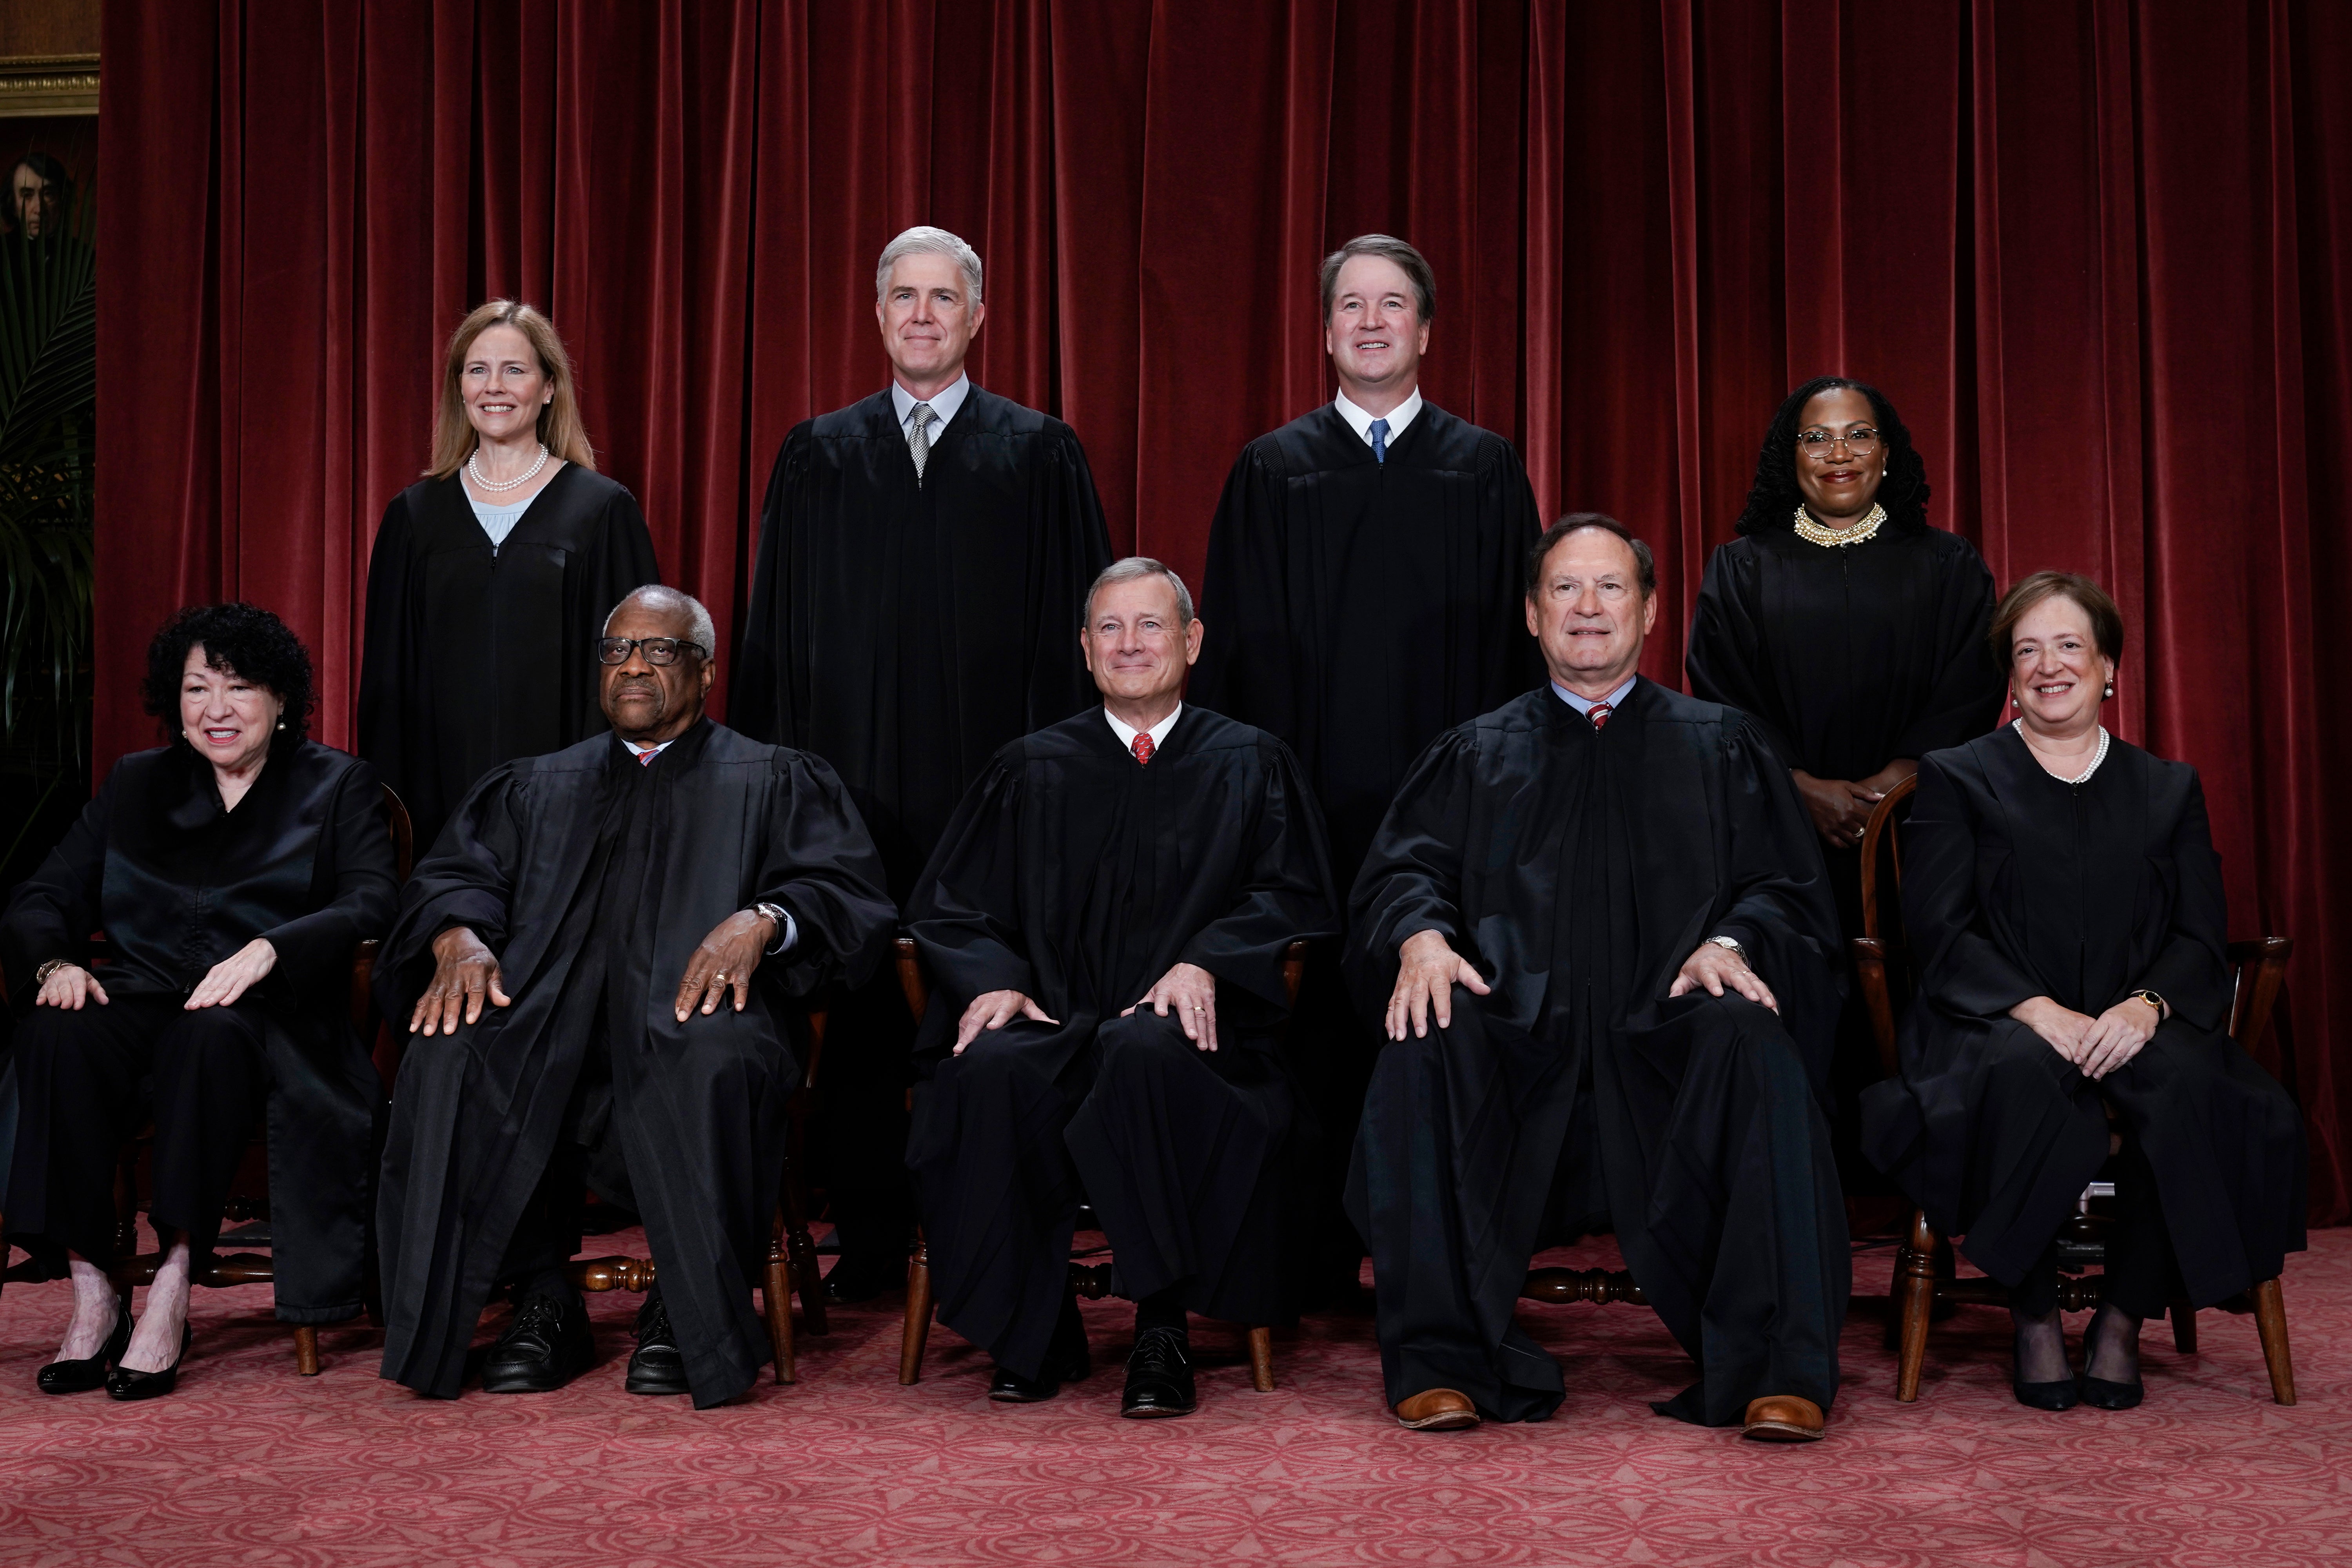 Members of the Supreme Court sit for a new group portrait following the addition of Associate Justice Ketanji Brown Jackson, at the Supreme Court building in Washington in October 2022